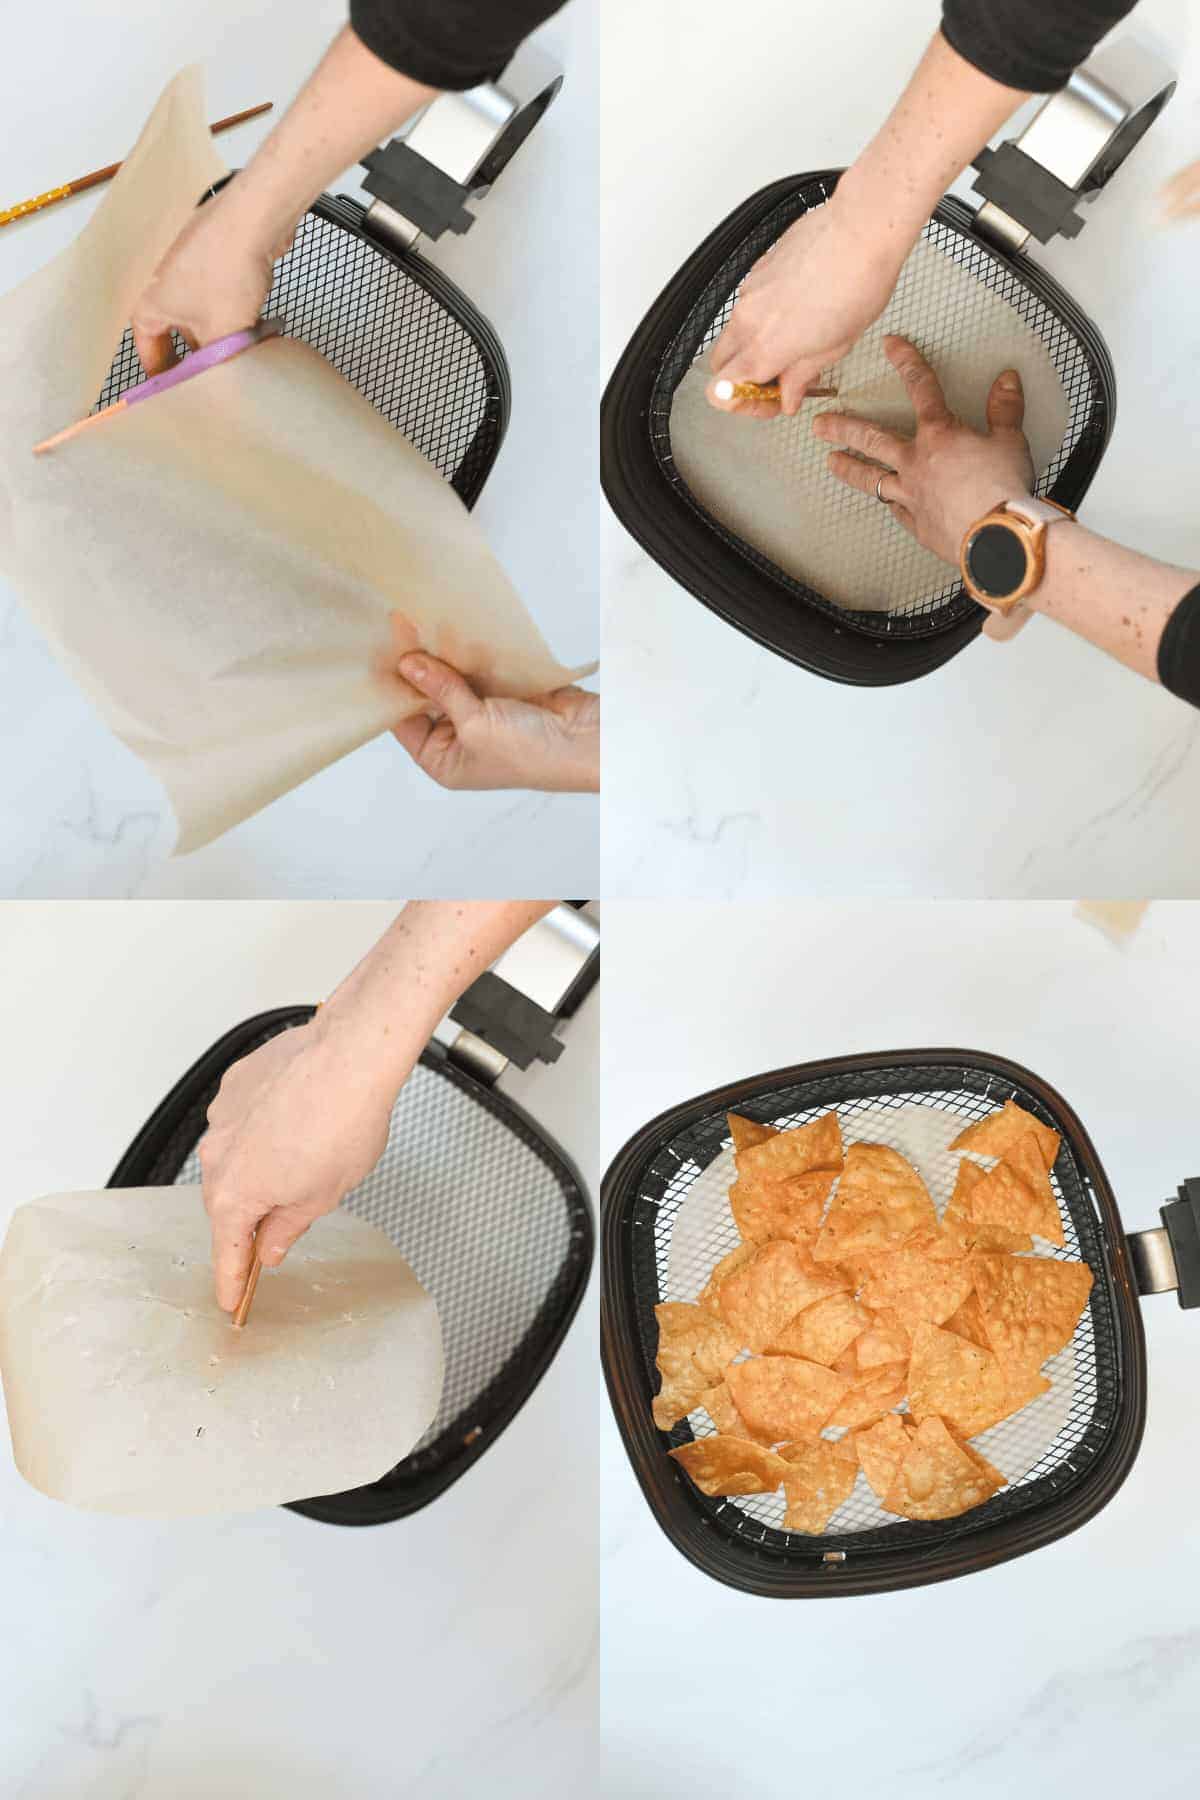 How To cut parchment paper for air fryer